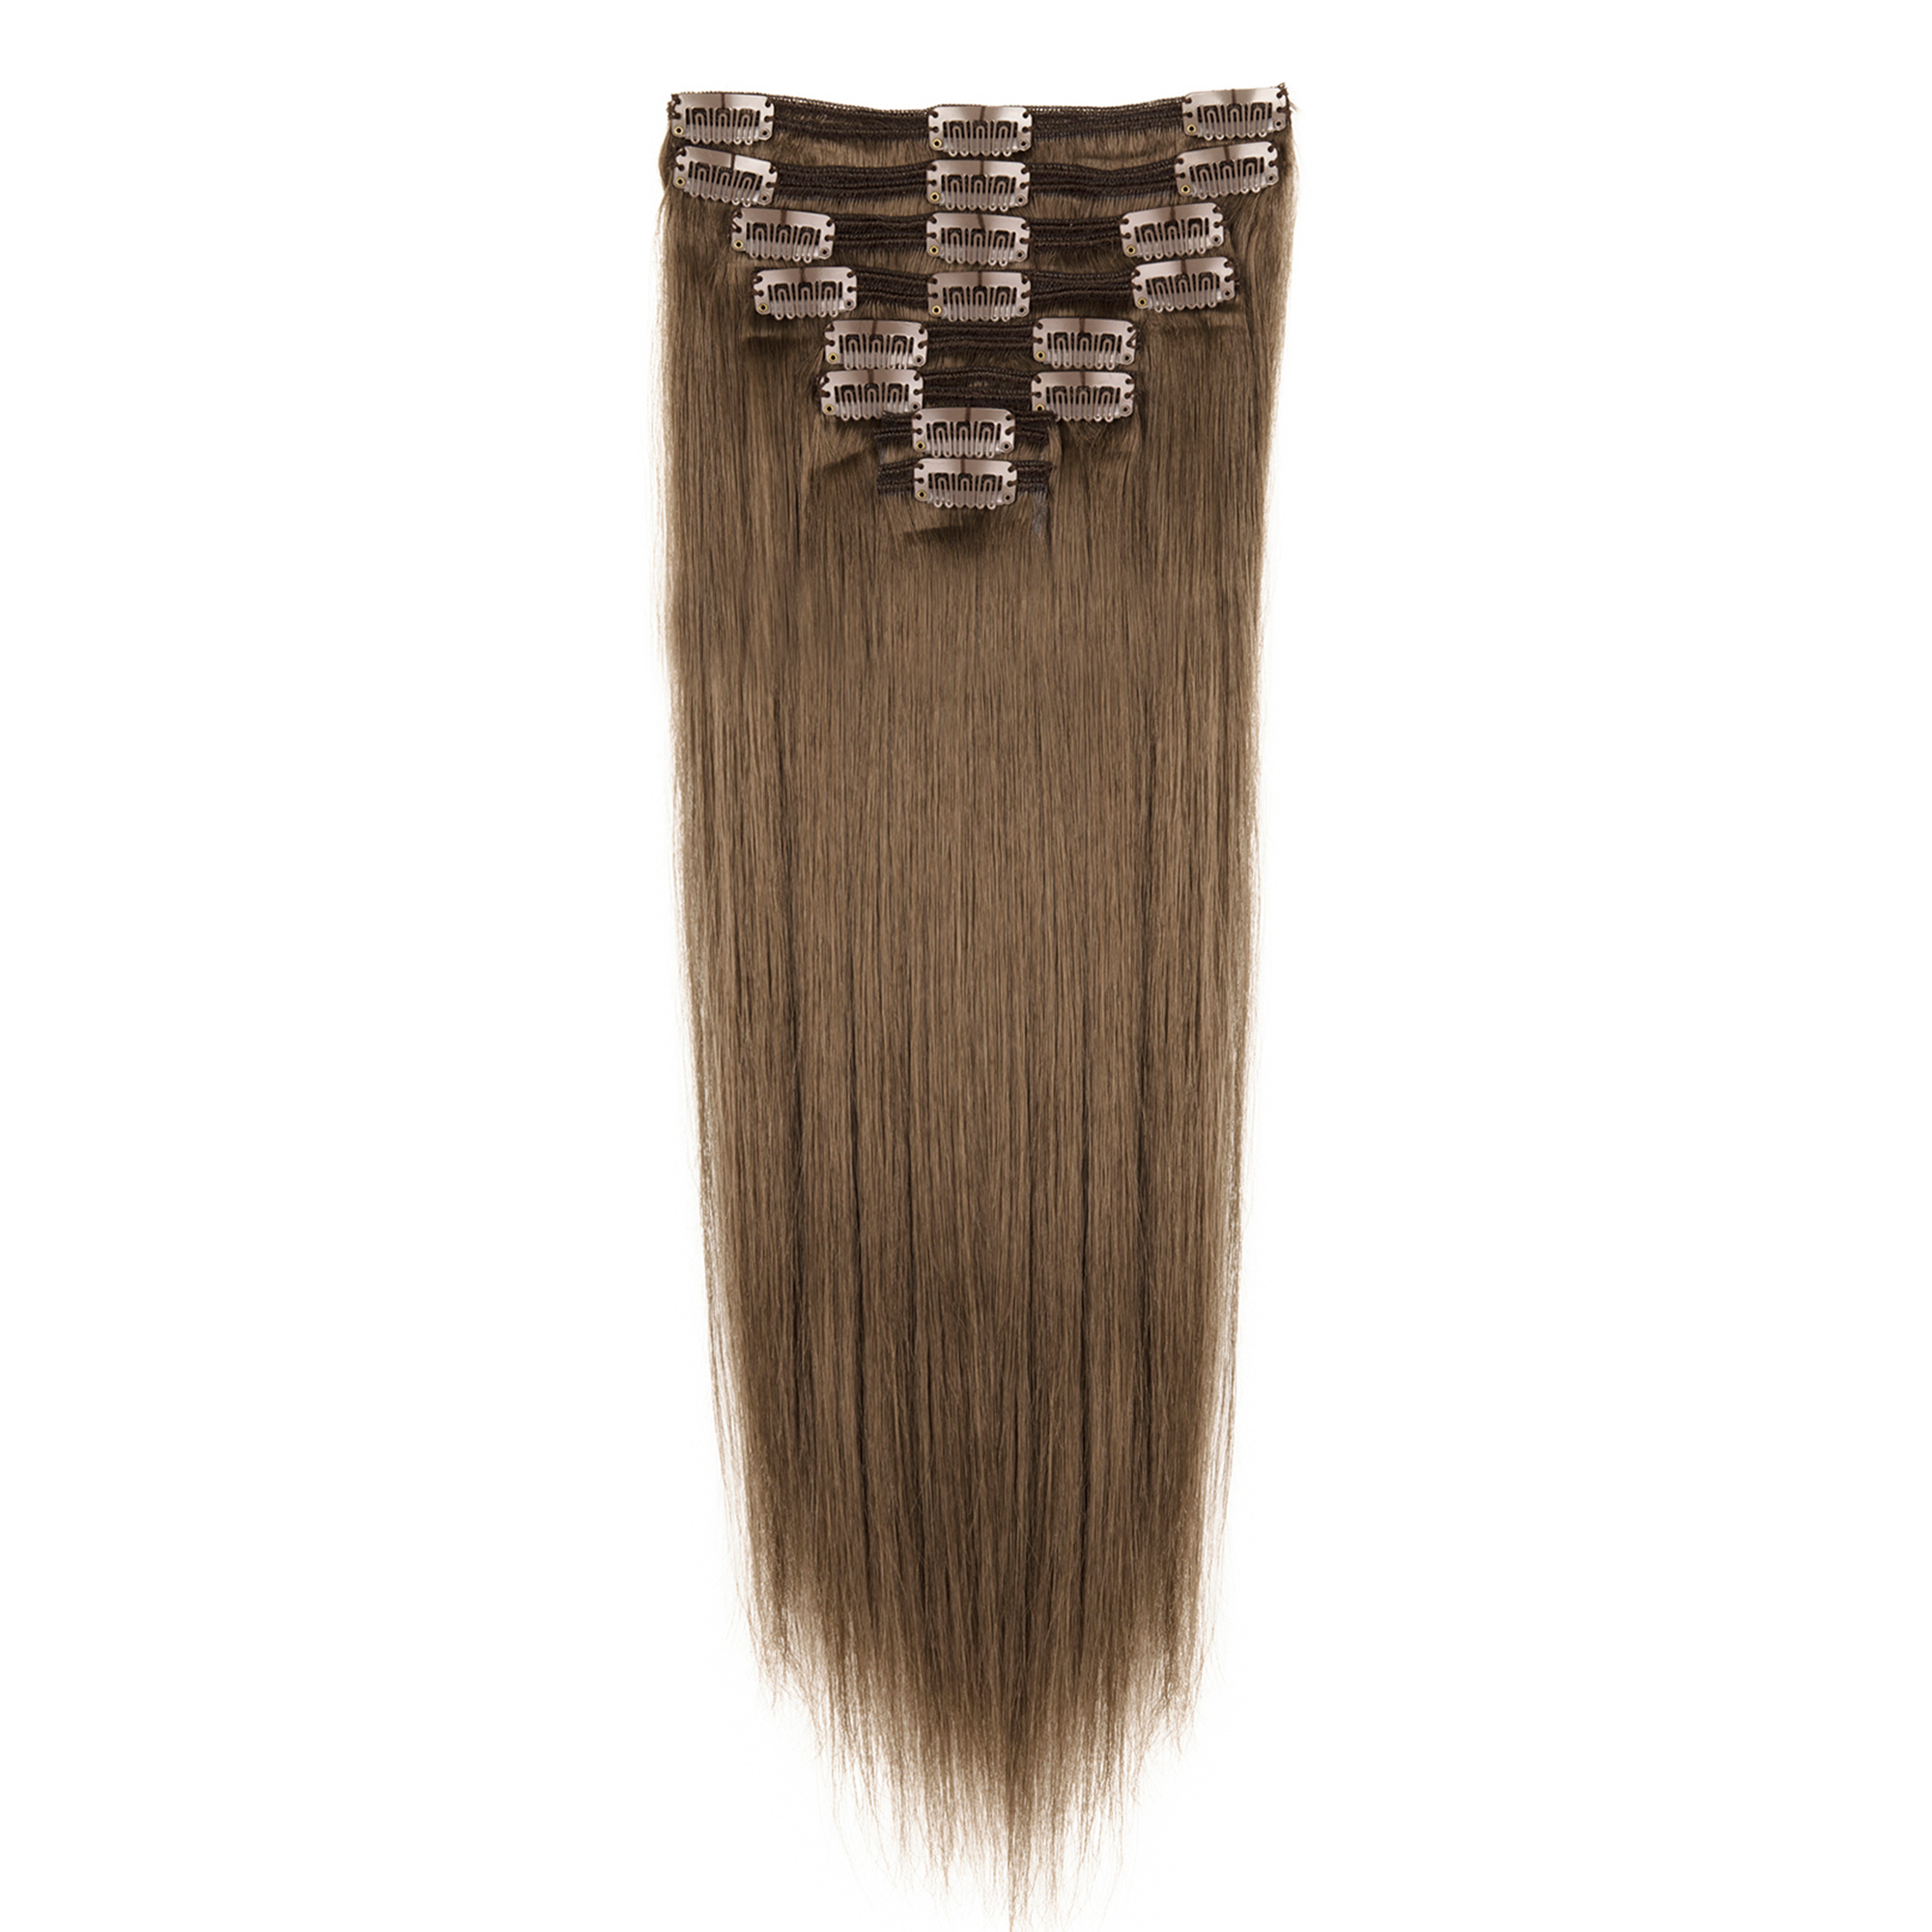 LELINTA 8pcs 14" 16" 18" 20" 22" Clip in Hair Extensions Remy Human Hair Women Silky Straight Human Hair Extensions 18 Clips - image 3 of 8